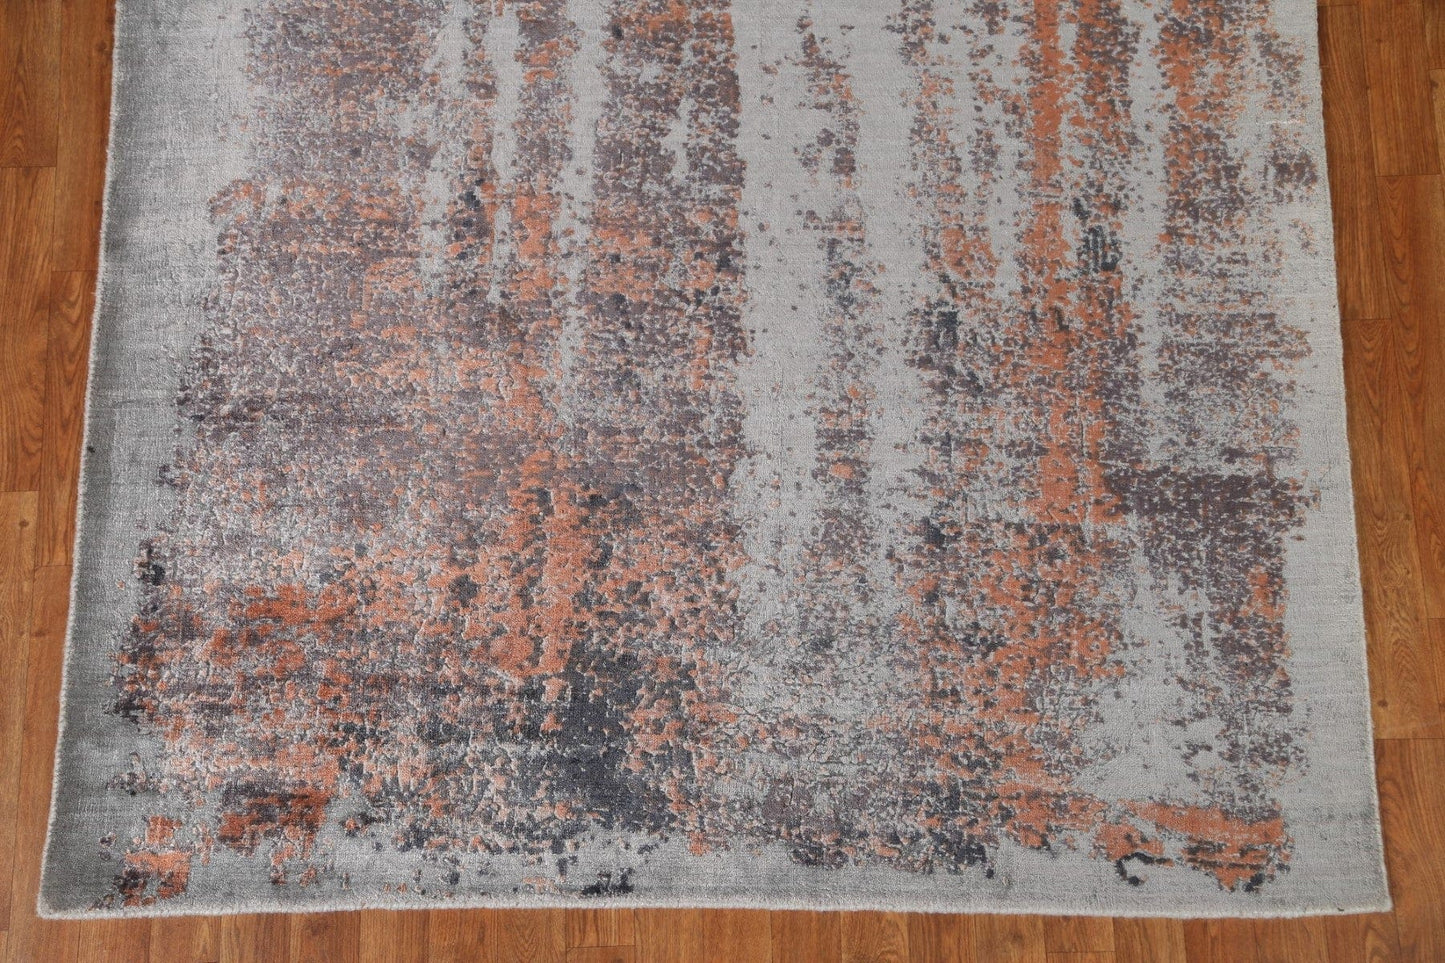 100% Silk Distressed Look Abstract Area Rug 5x7